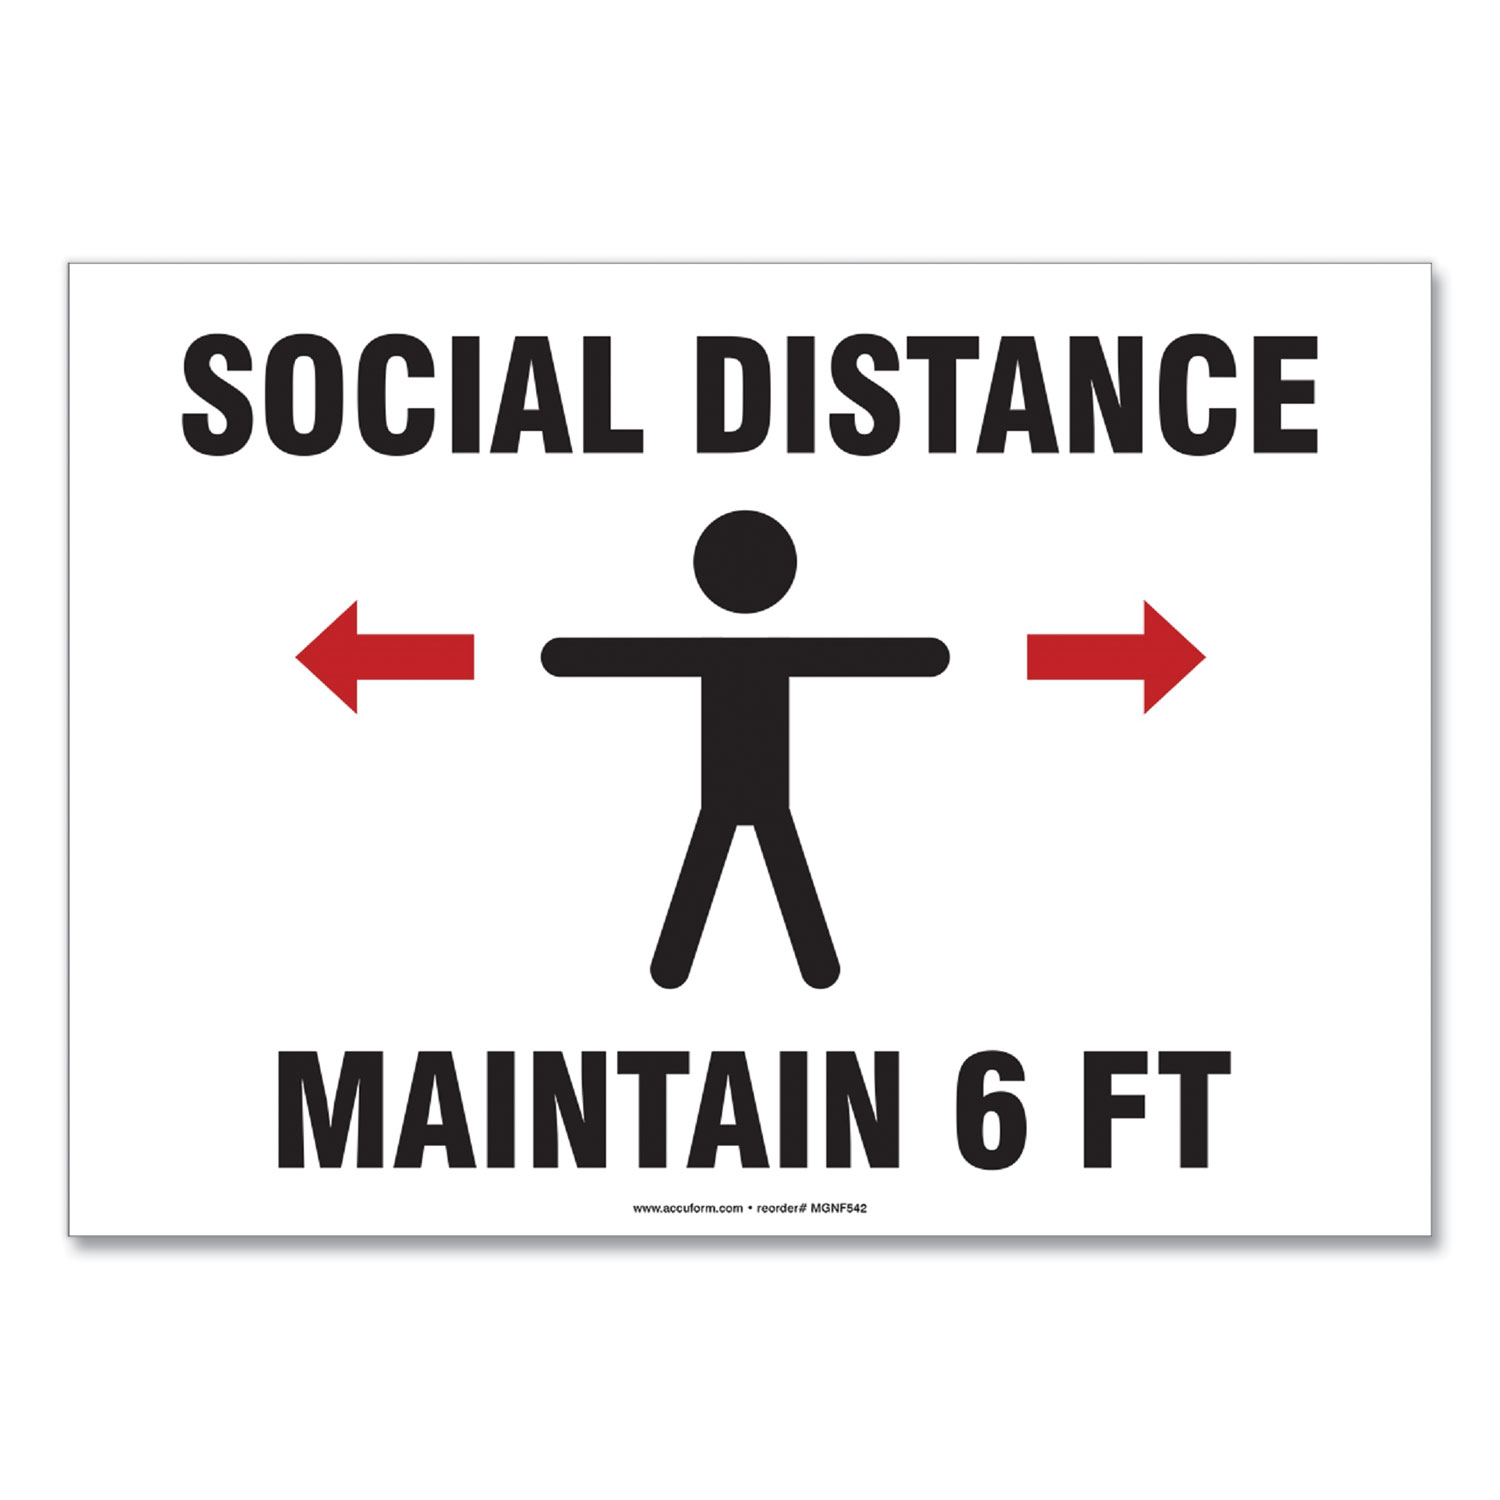  Accuform MGNF540VPESP Social Distance Signs, Wall, 10 x 7, Social Distance Maintain 6 ft, Human/Arrows, White, 10/Pack (GN1MGNF540VPESP) 